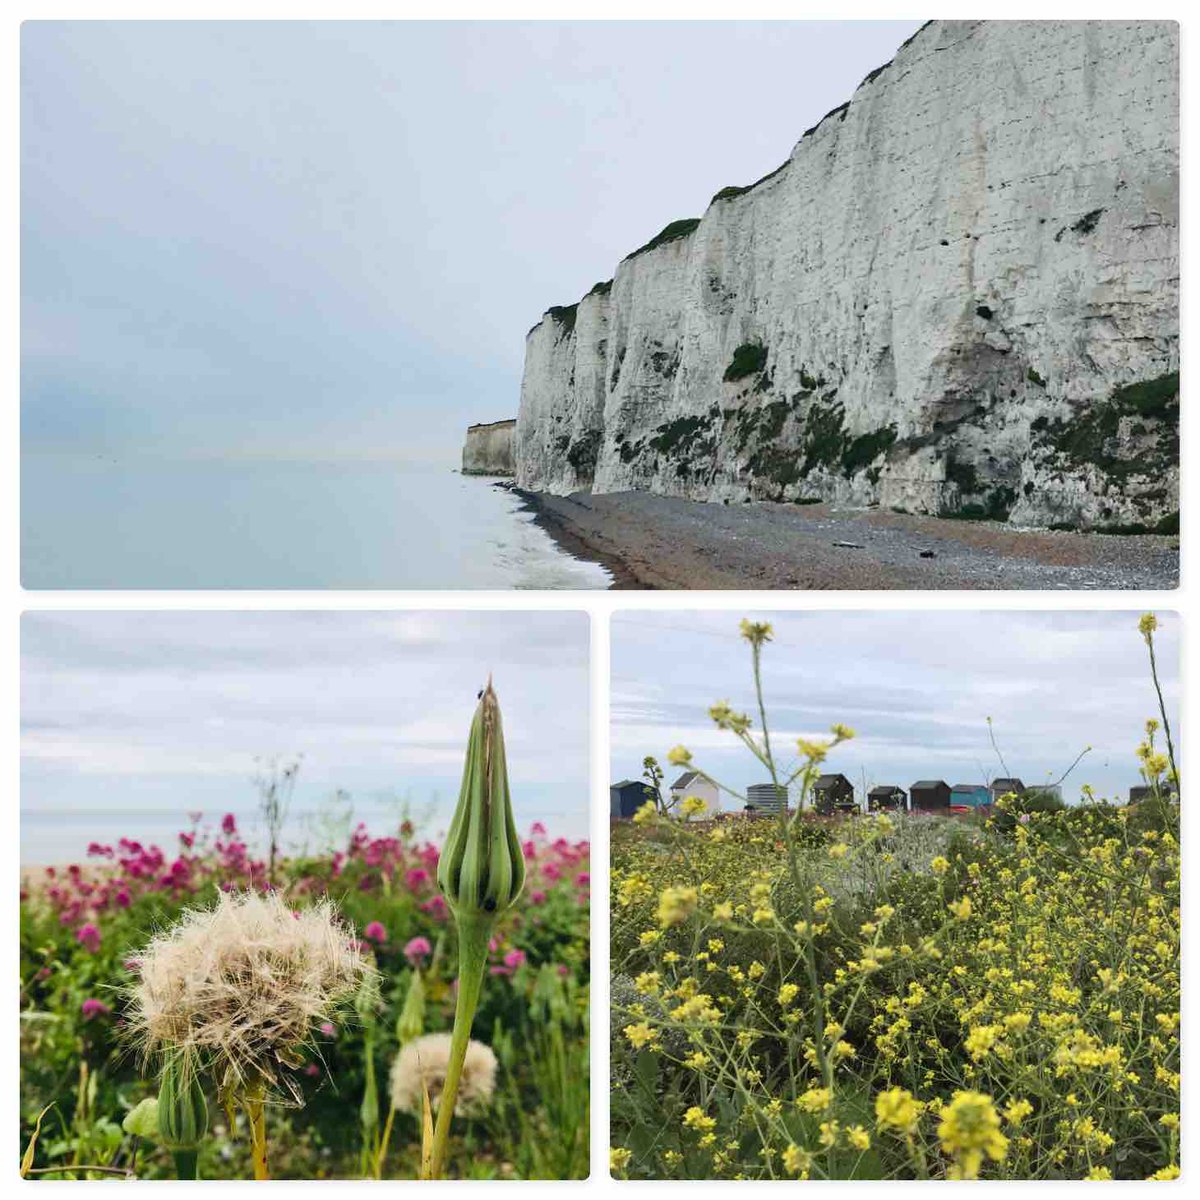 So #lookingforward to #summertime #Dover - #perfect for when the #weather is fine #folkestone #whitecliffsofdover Kent #coast @uktraveltourism @aroundaboutbrit @DoverWaW @WalkersrWelcome @saturdaywalkers @VisitDover @VisitDeal @VisitFolkestone @daysoutguide @KentScenes #vacation